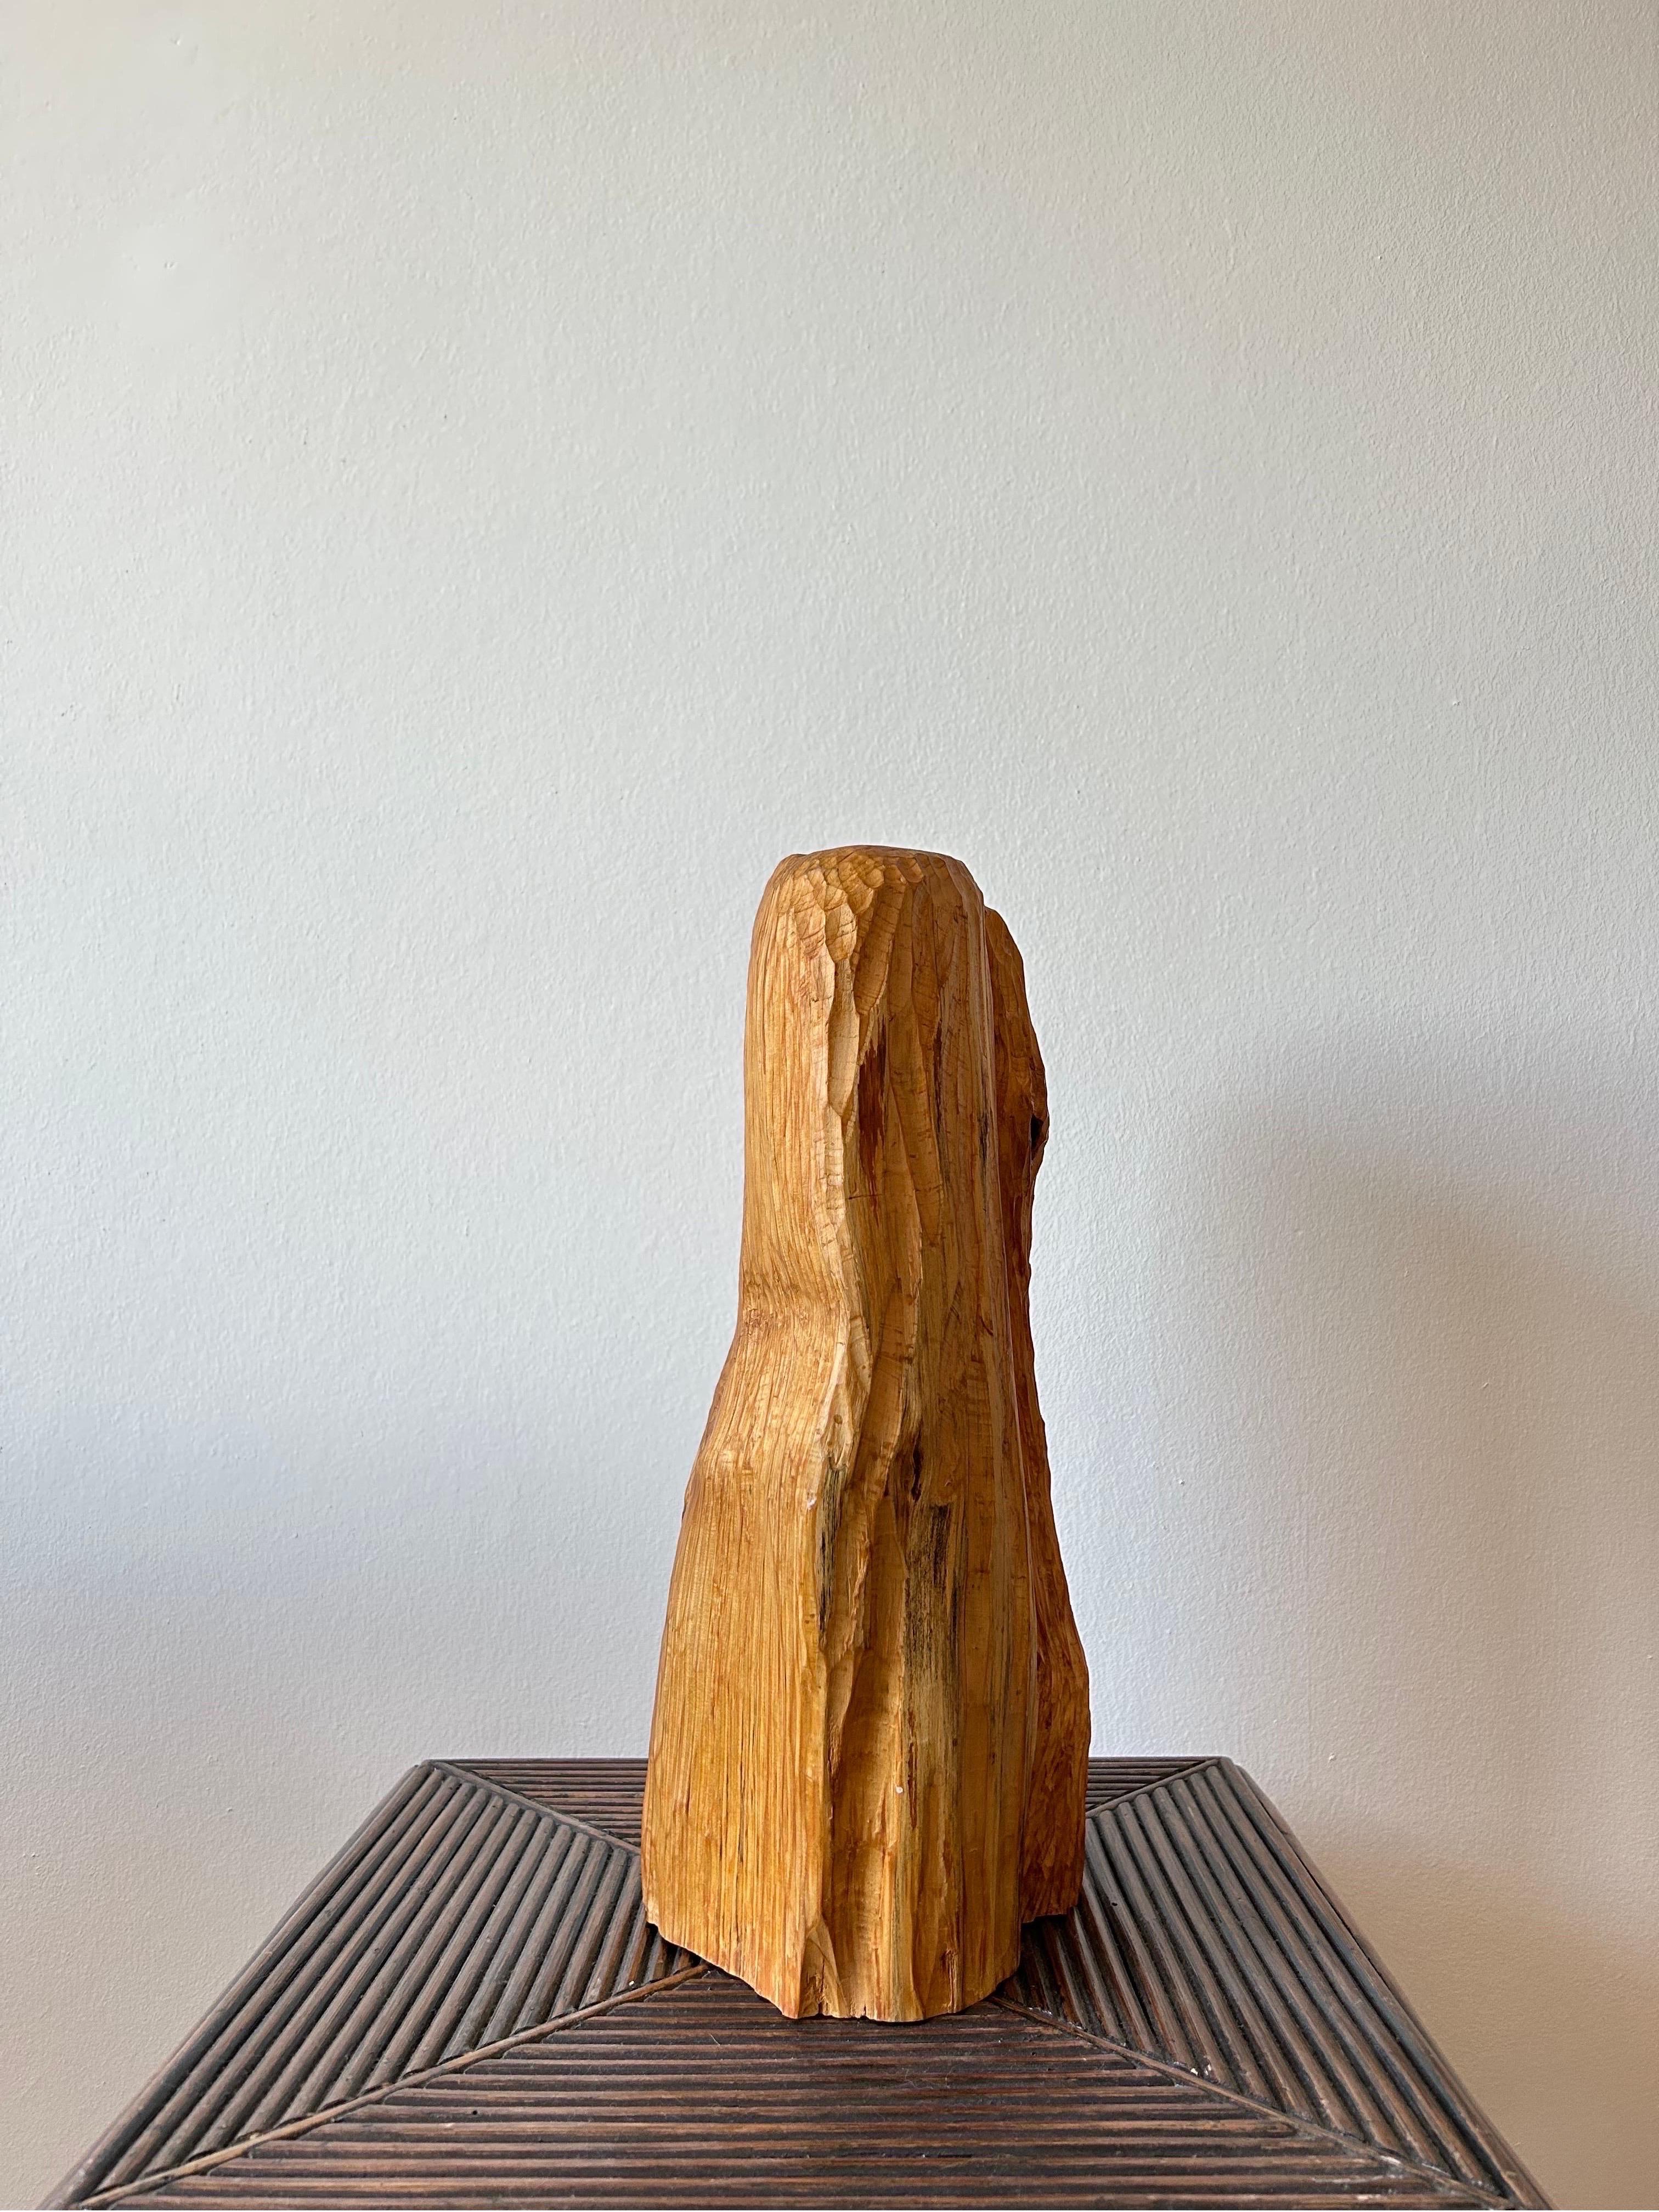 Rare Abstract wooden sculpture by a unknown danish artist made in the 1960s.

The sculpture is made out of one solid piece of wood by a unknown but talented danish artist.

The sculpture is very similar to pieces by Danish artist Erik Thommesen